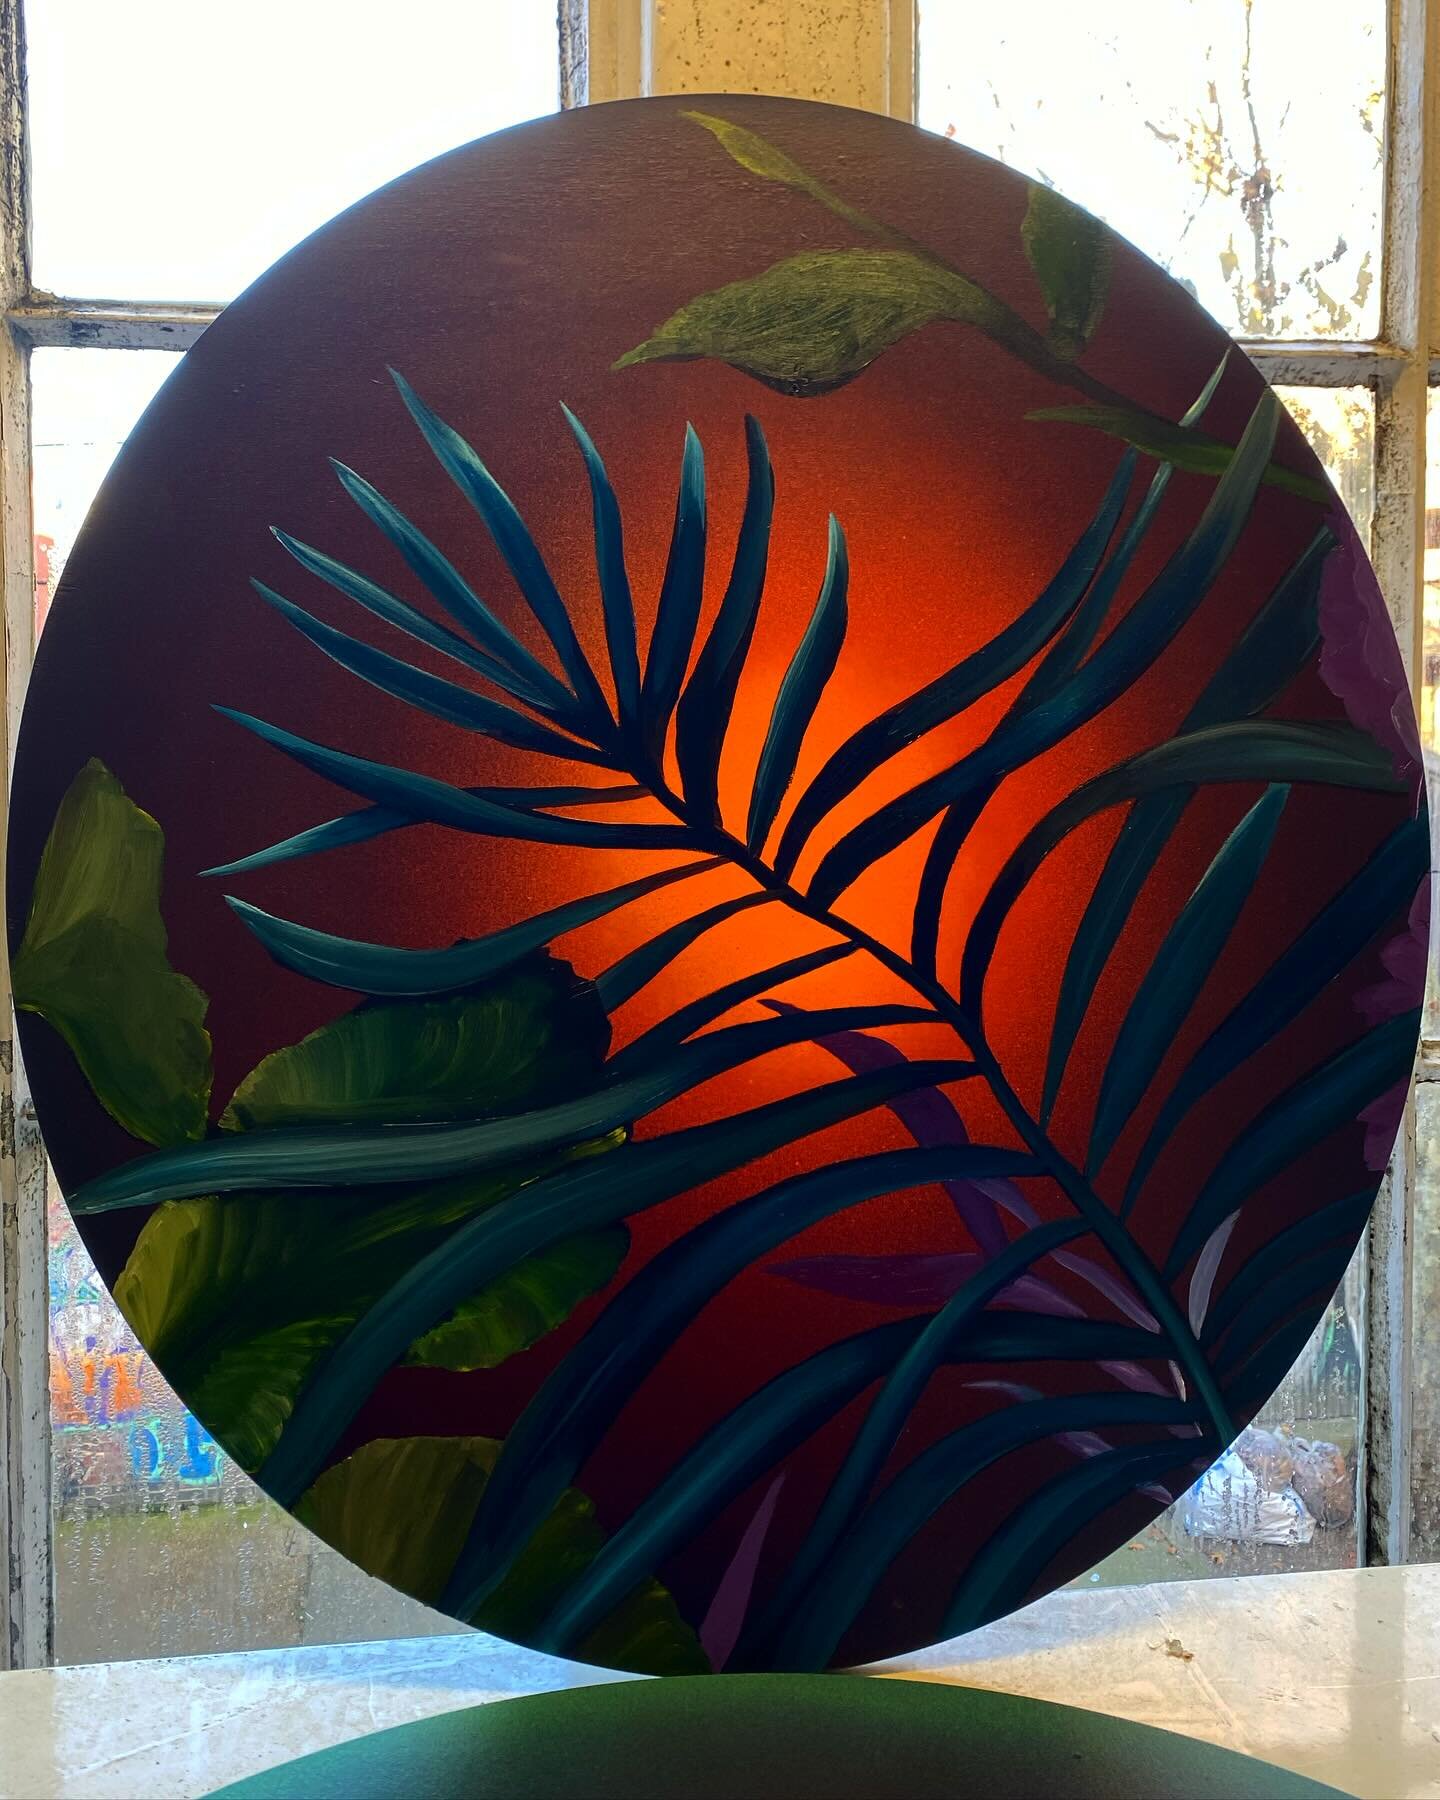 Channeling some tropical heat with this winter warmer! Aerosol &amp; oil on wood. One of a few pieces I&rsquo;ve been creating in response to my adventures in the rainforest and jungle in Brazil &amp; Costa Rica last year. 🌱